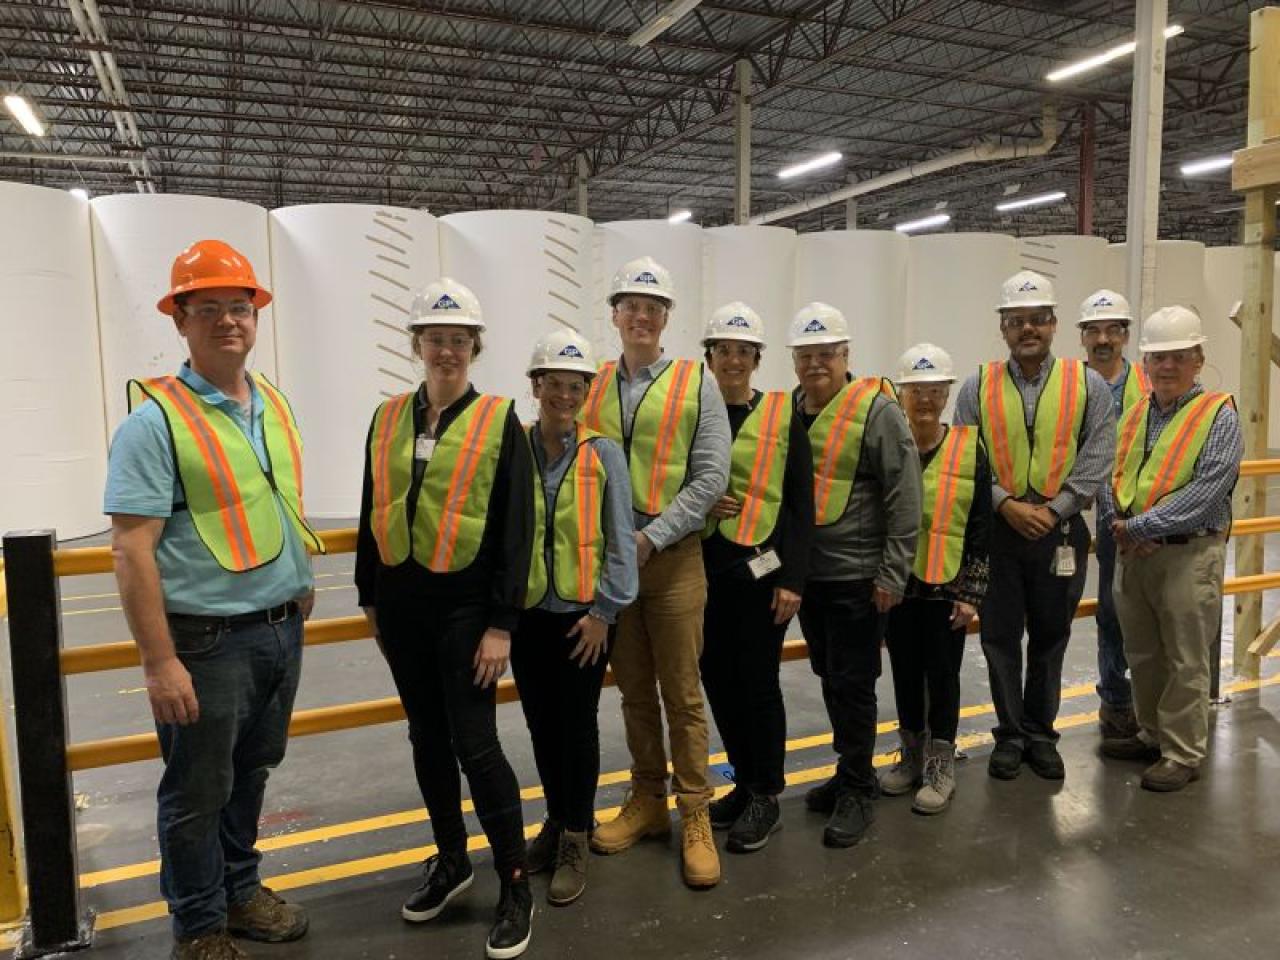 A group of people posed in a large warehouse. Each wearing a hard hat and high-vis vest.